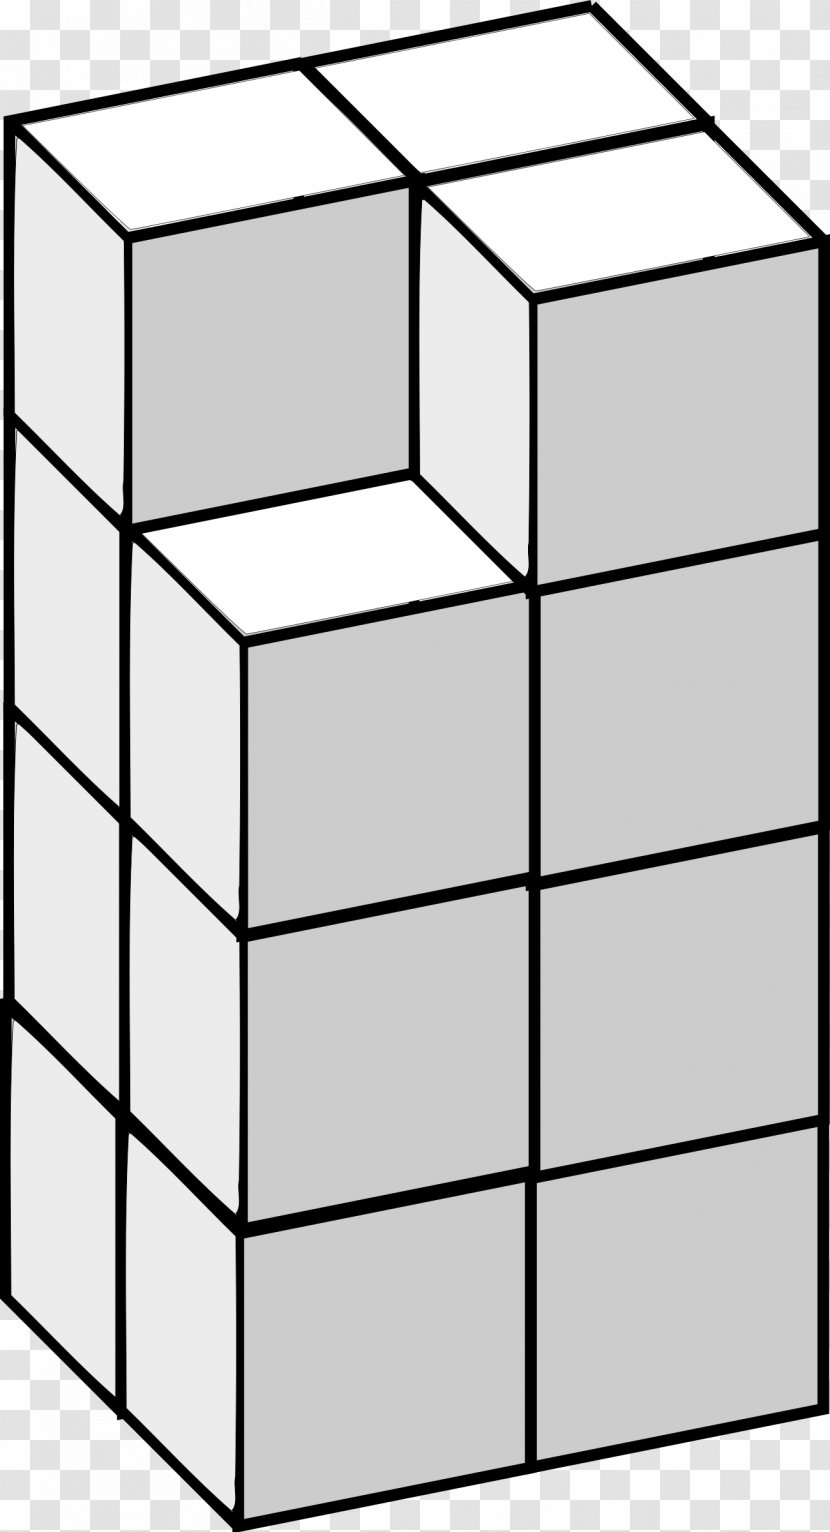 Rectangle Square Area Pattern - Cube Transparent PNG